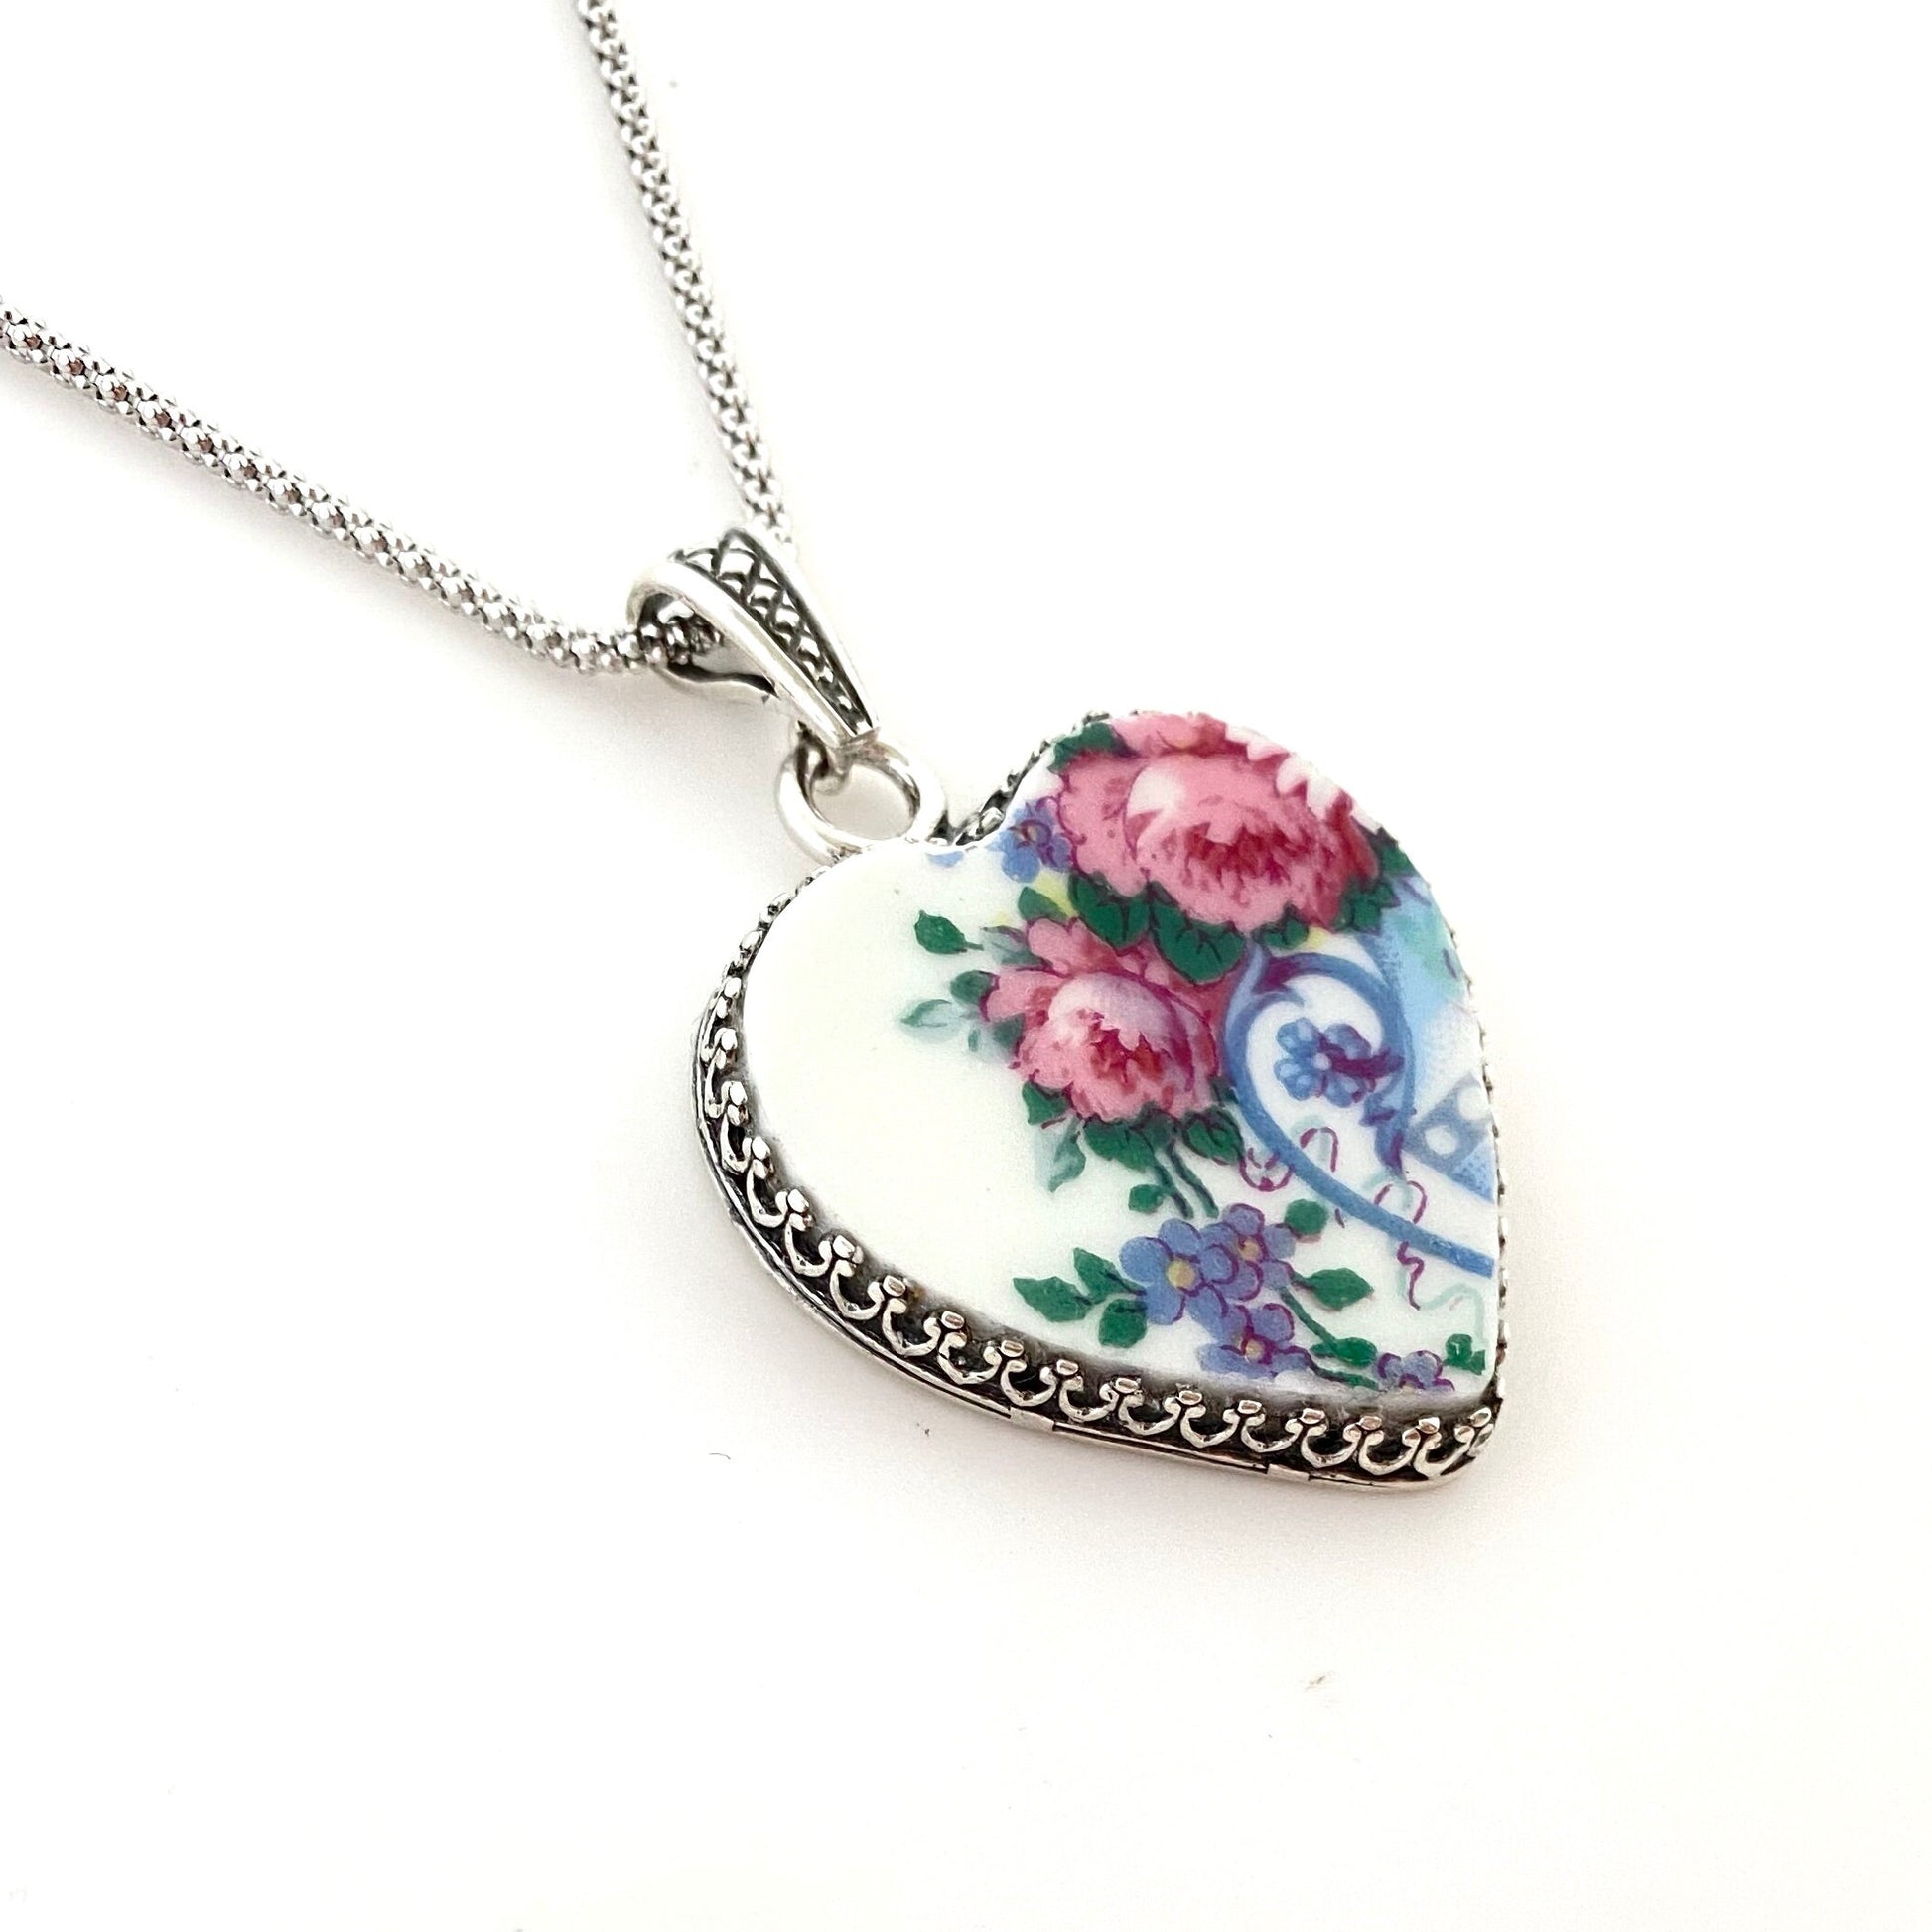 Romantic Rose and Forget Me Not Necklace, 20th Anniversary Gift for Wife, Antique French China Jewelry